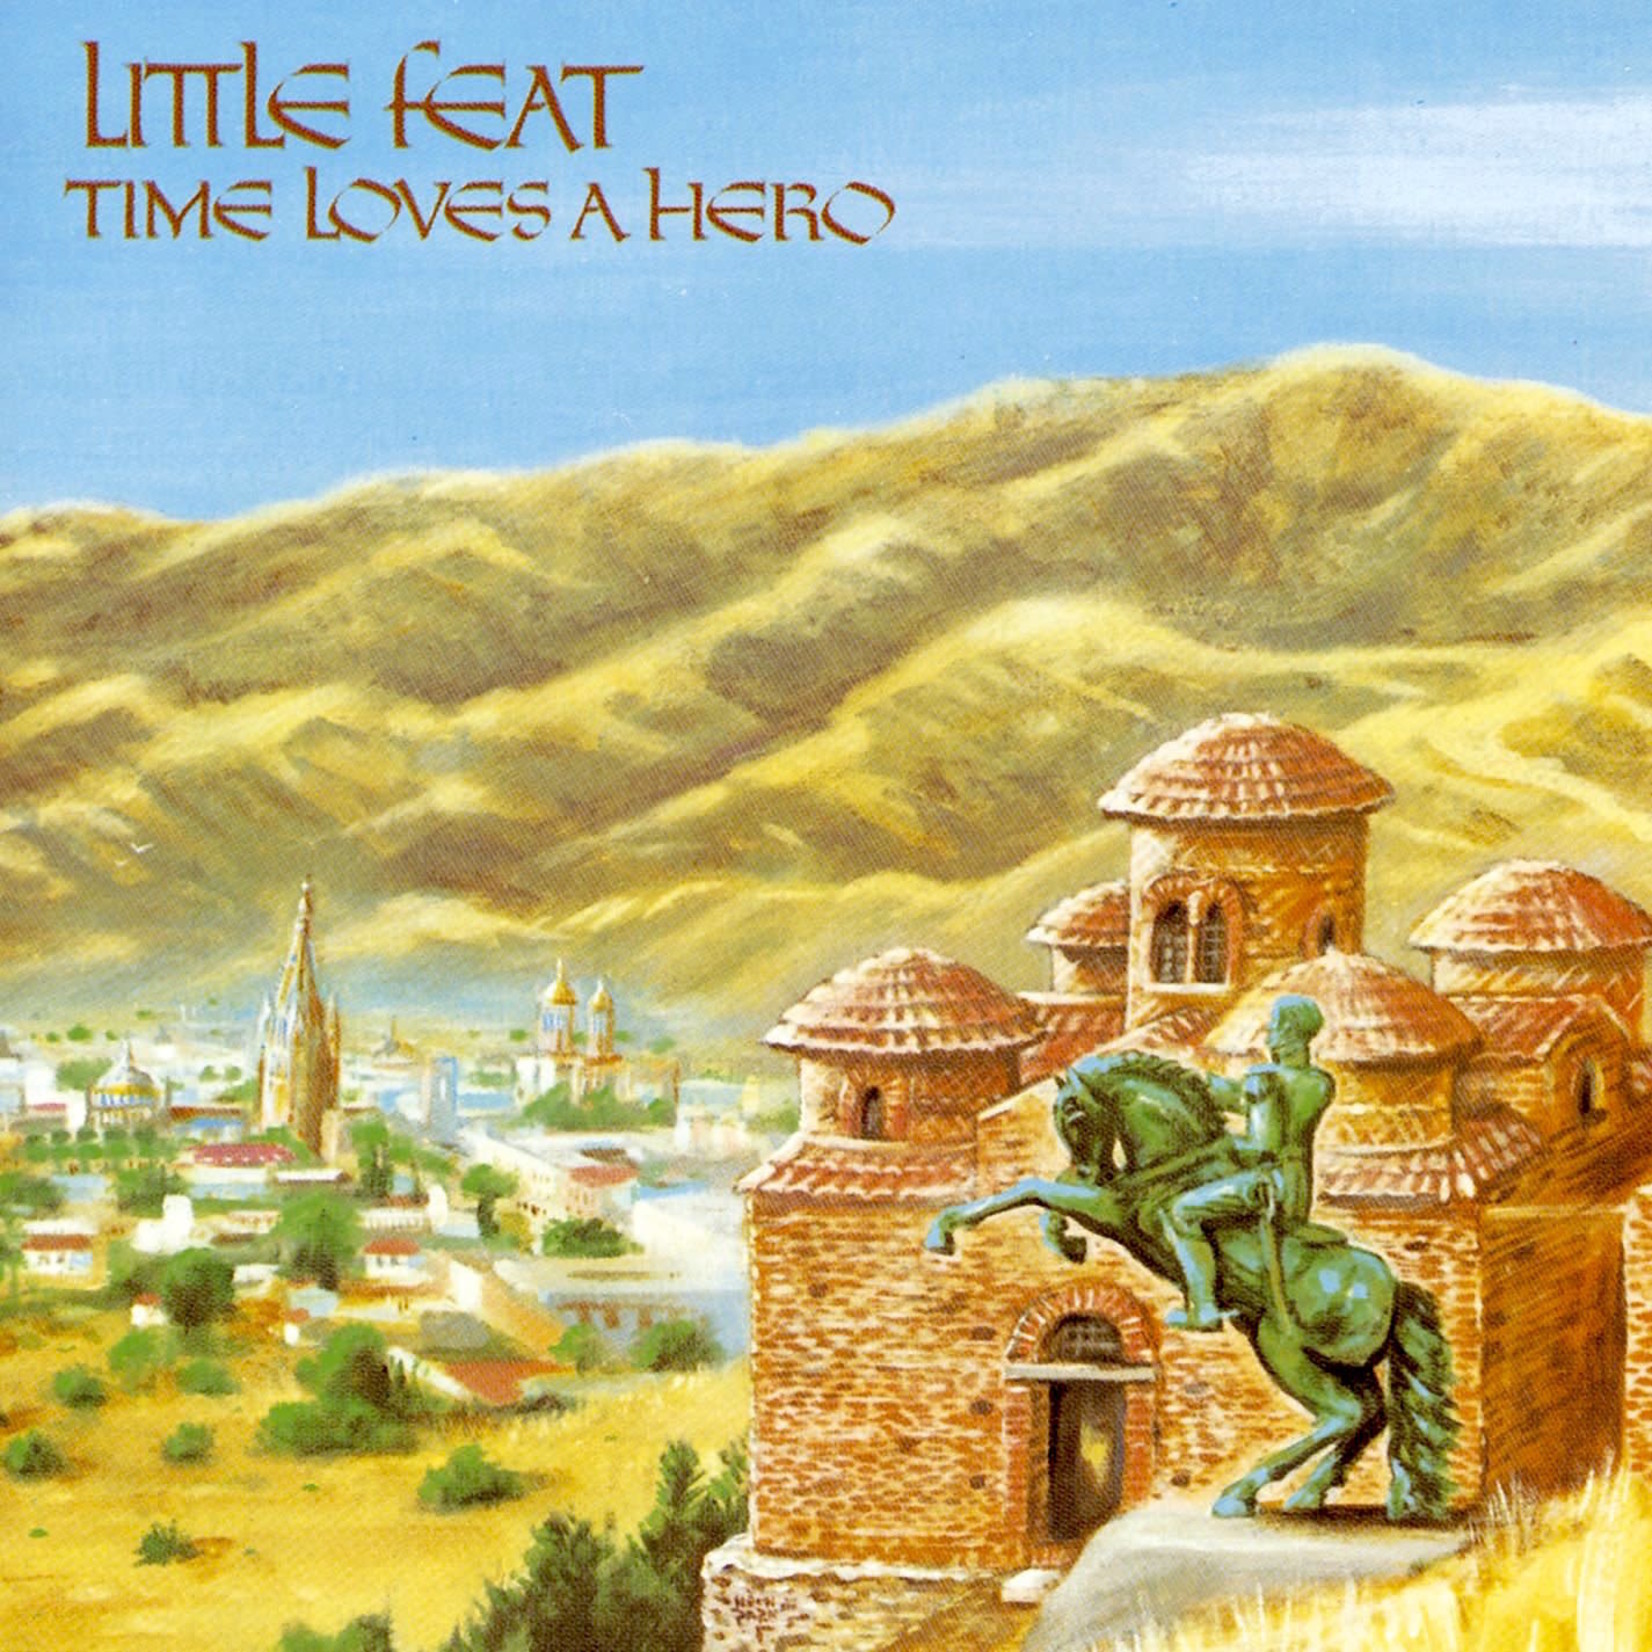 [Vintage] Little Feat - Time Loves a Hero